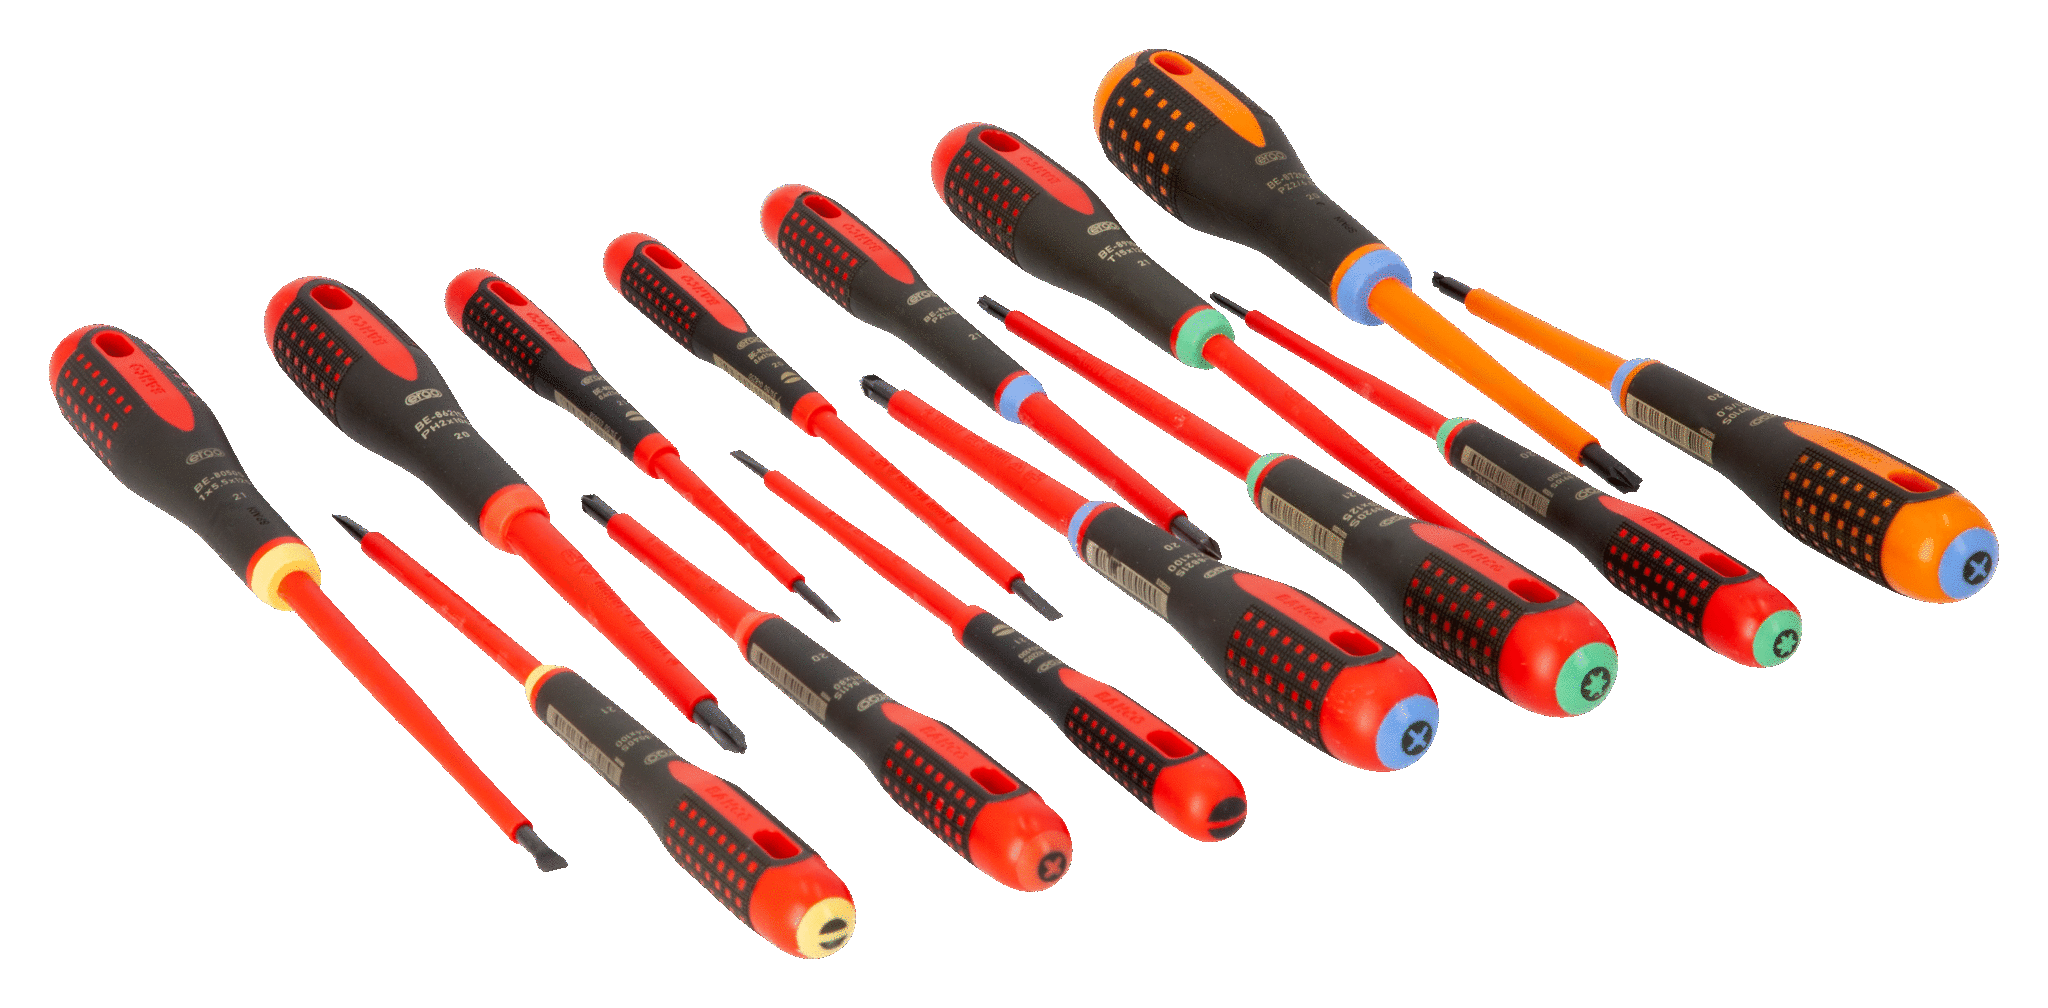 INSULATED RUBBER GRIP ELECTRICIAN'S ELECTRONIC SCREWDRIVER KIT 7 PC SET 